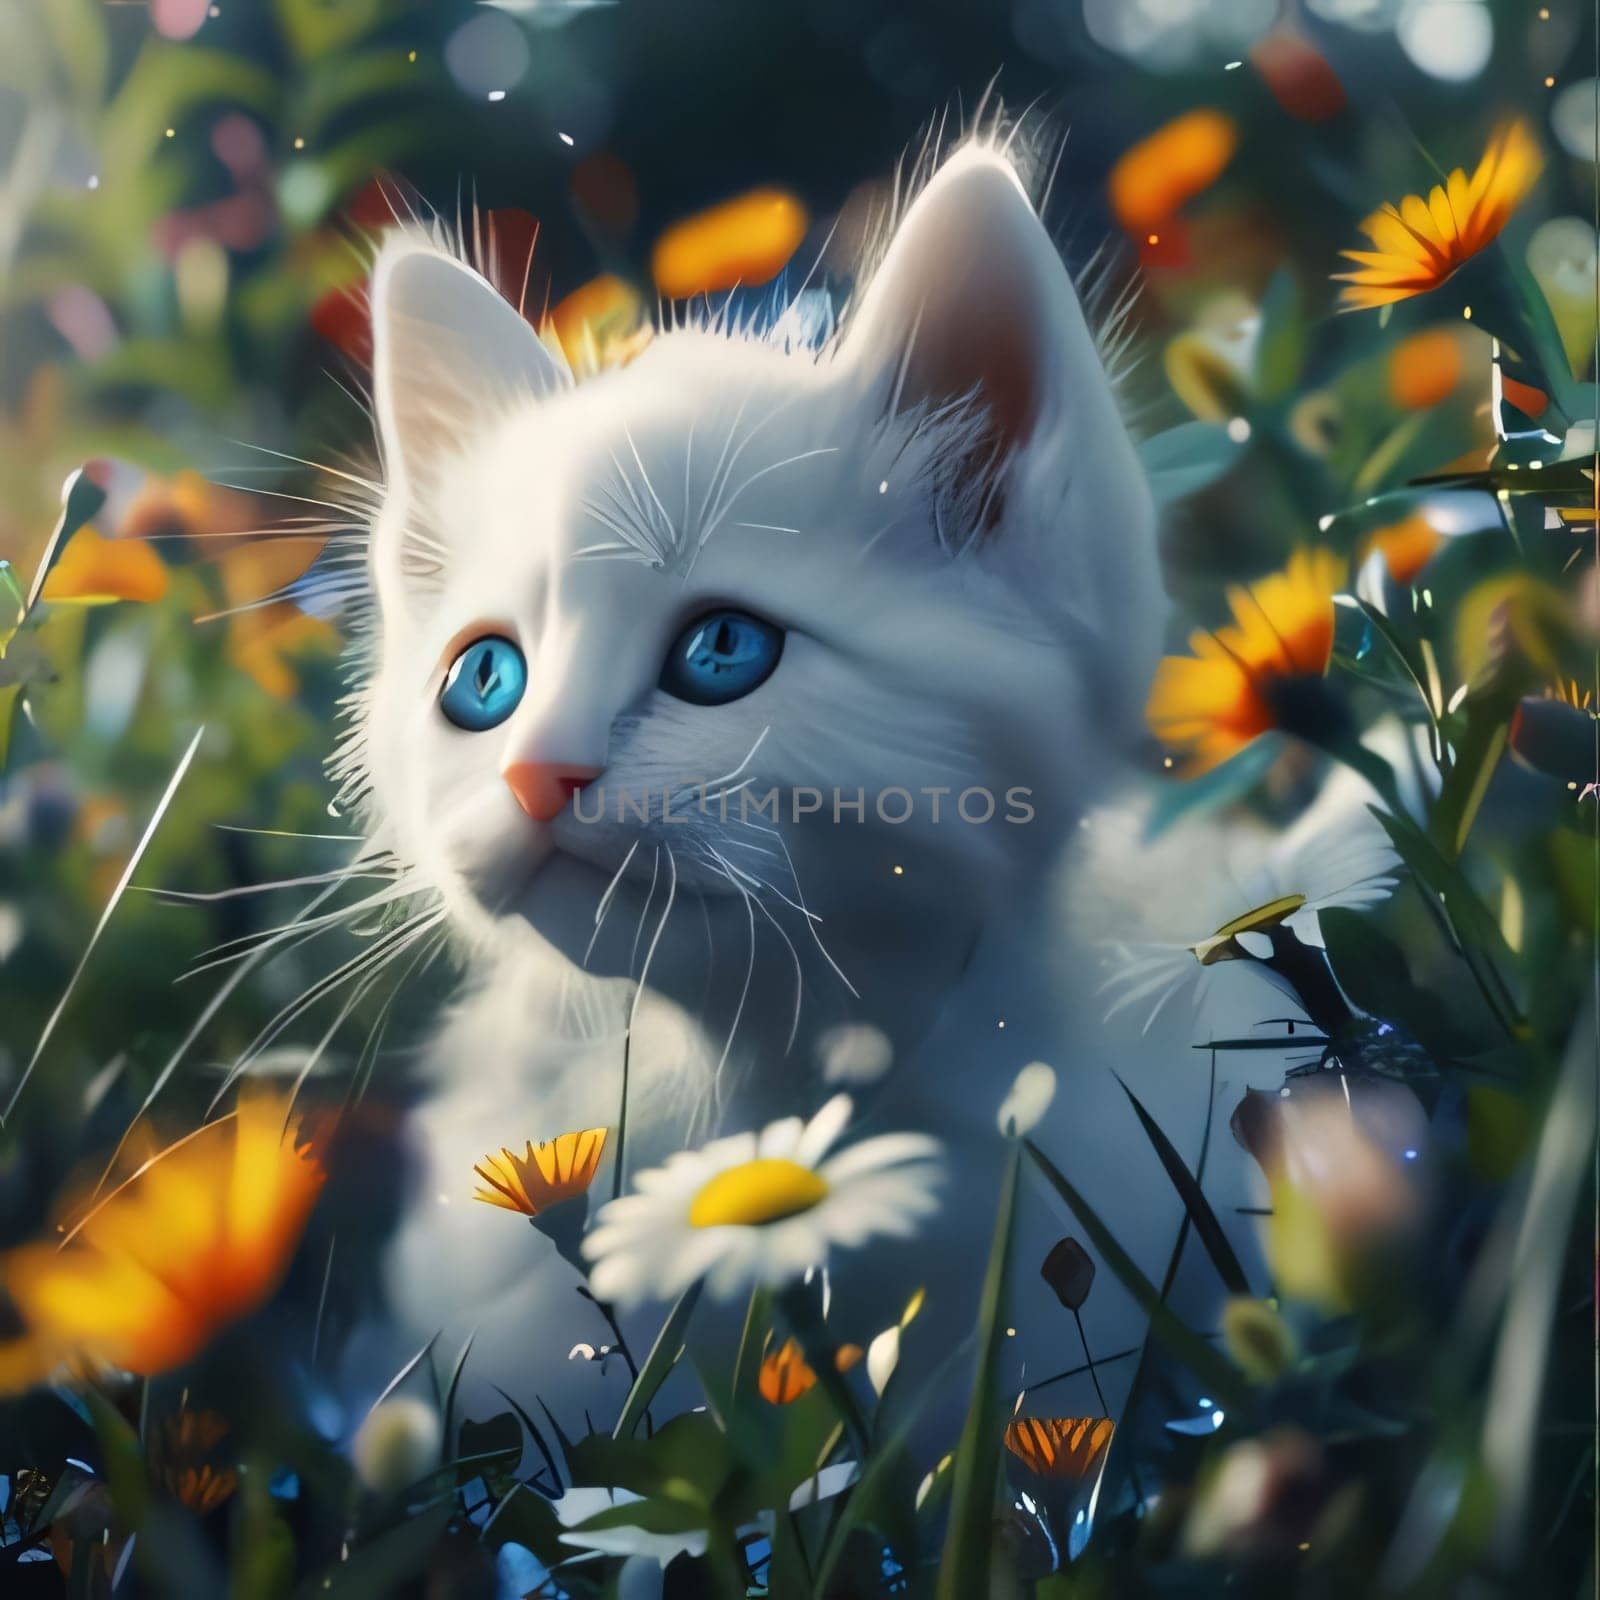 Illustration of a small white cat with blue eyes lying in the grass with flowers. Flowering flowers, a symbol of spring, new life. A joyful time of nature awakening to life.